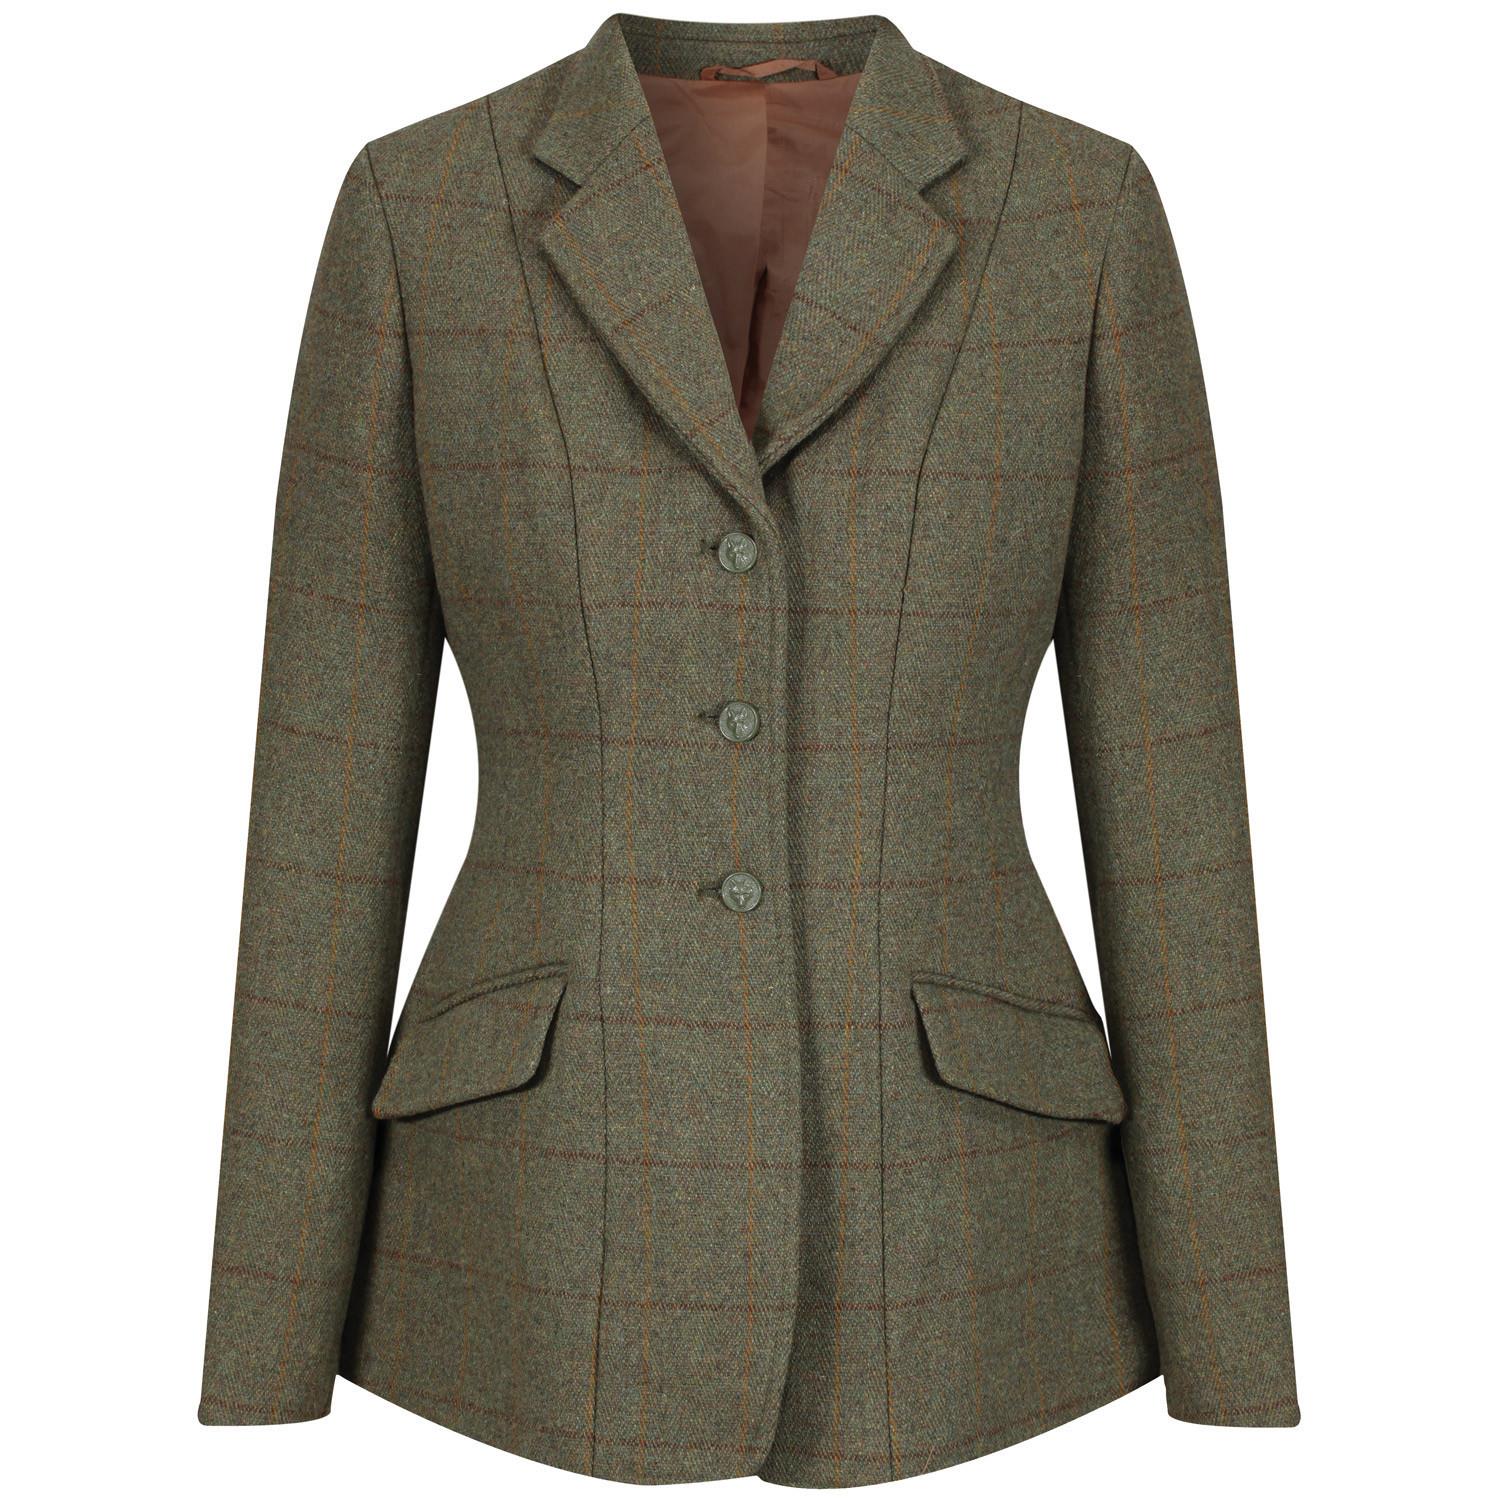 Equetech Childs Claydon Tweed Riding Jacket - Just Horse Riders